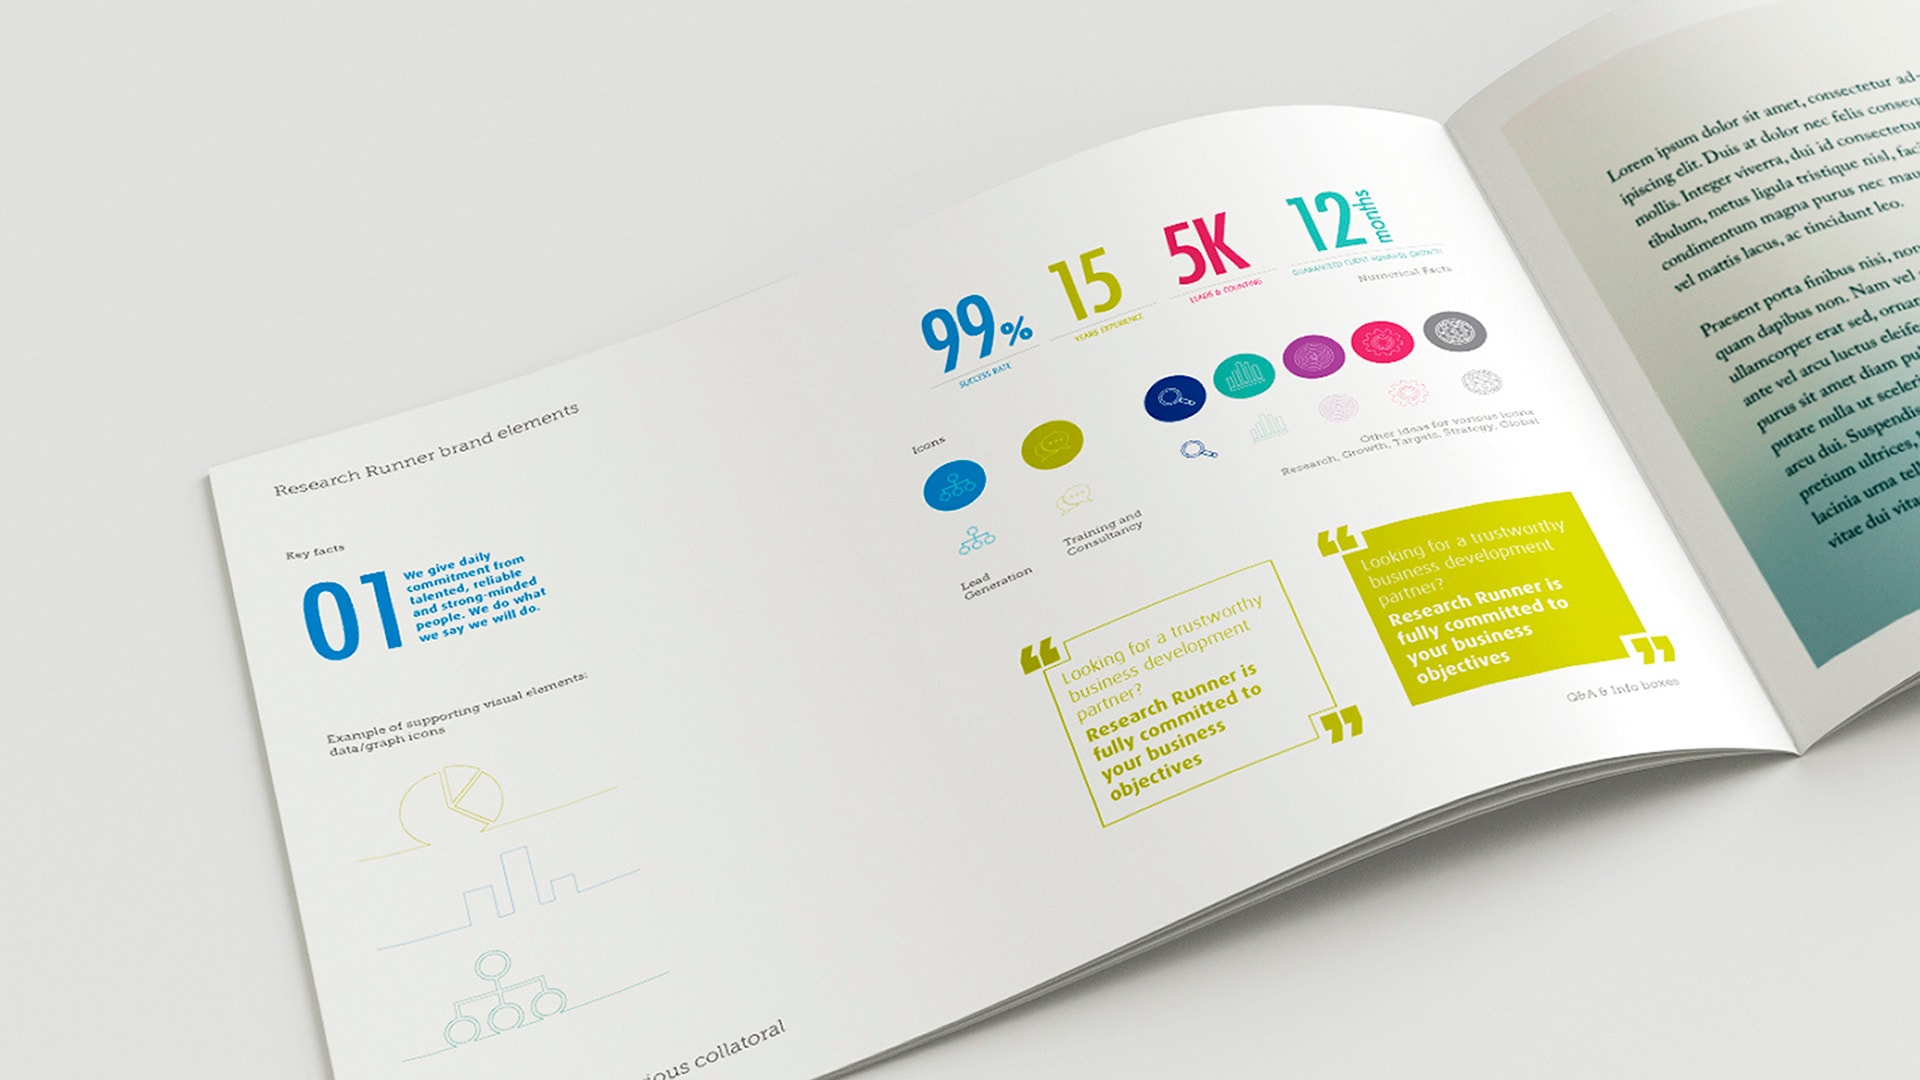 A photo of an open page of the Research Runner Brand Guidelines Core Elements booklet with colourful infographic on a smooth grey surface